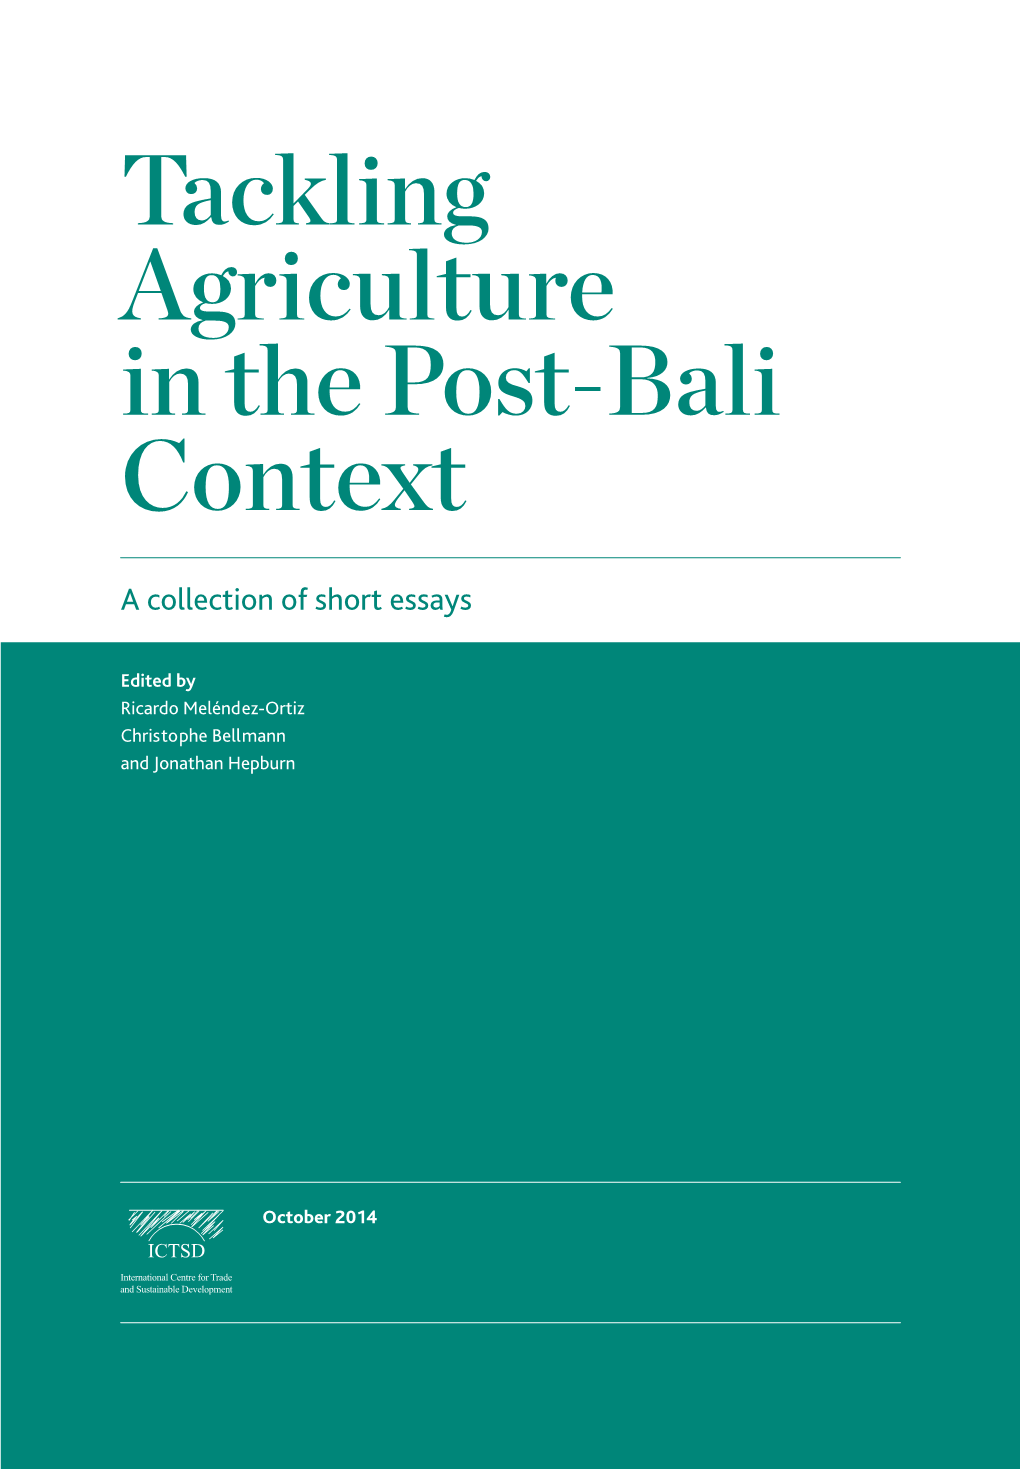 Tackling Agriculture in the Post-Bali Context